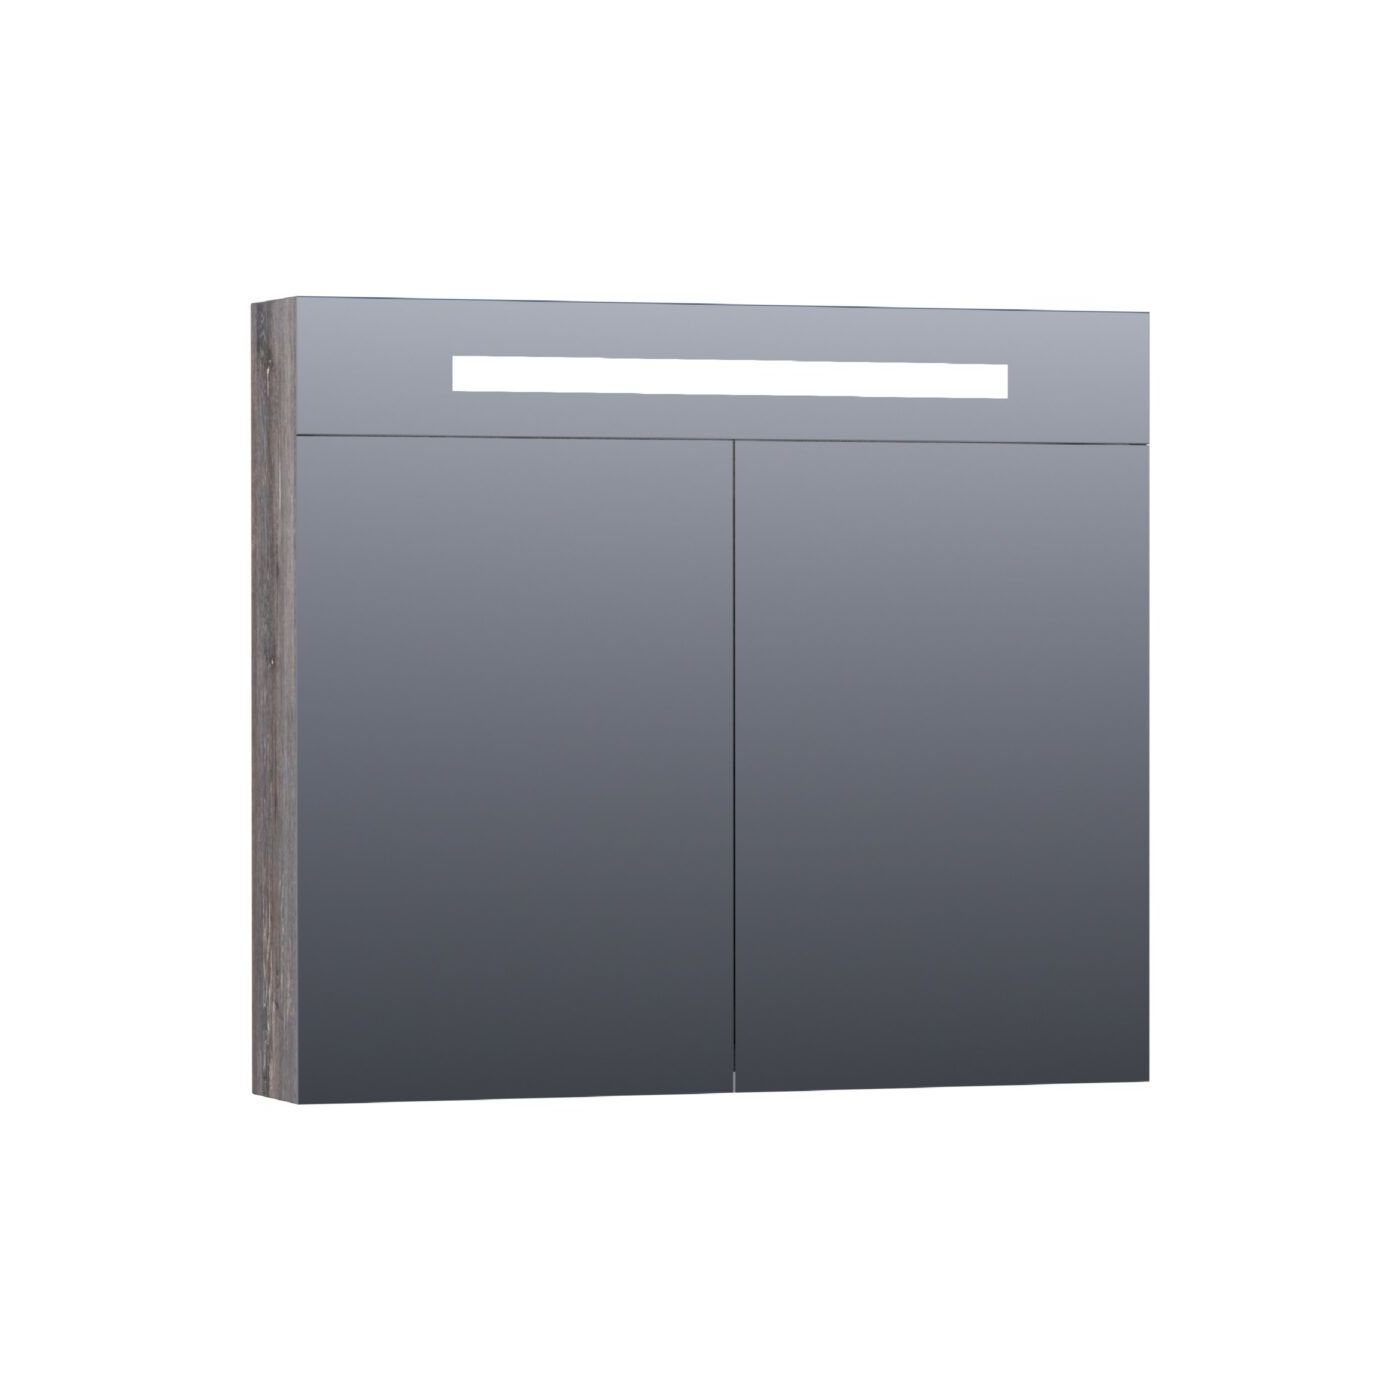 Tapo Double Face spiegelkast 80 grey canyon